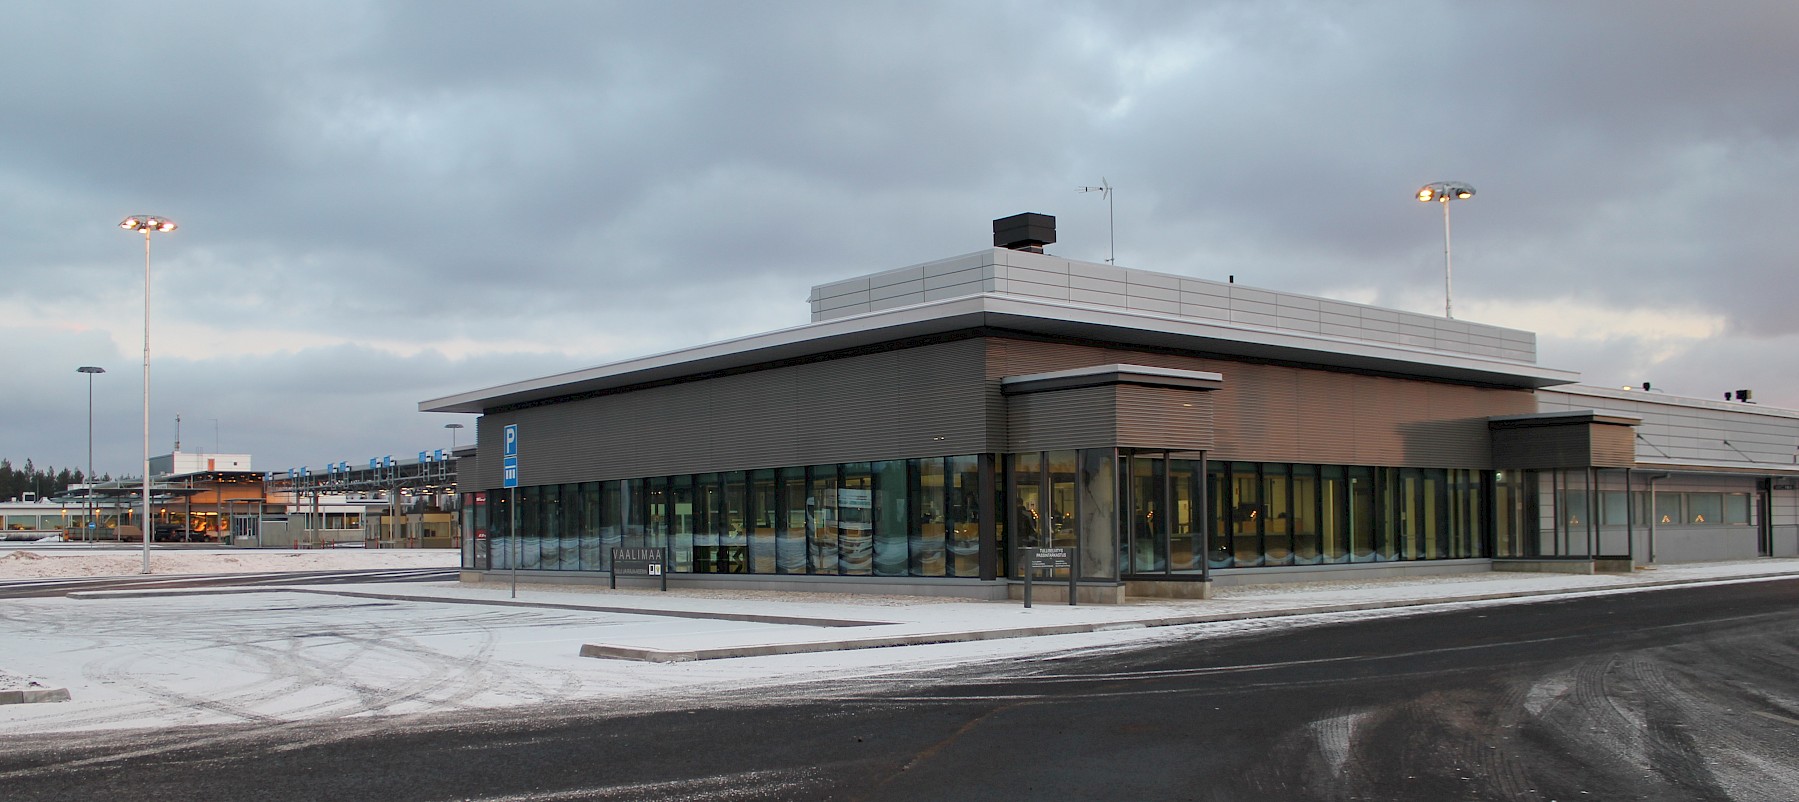 Photograph of Vaalimaa border crossing point building